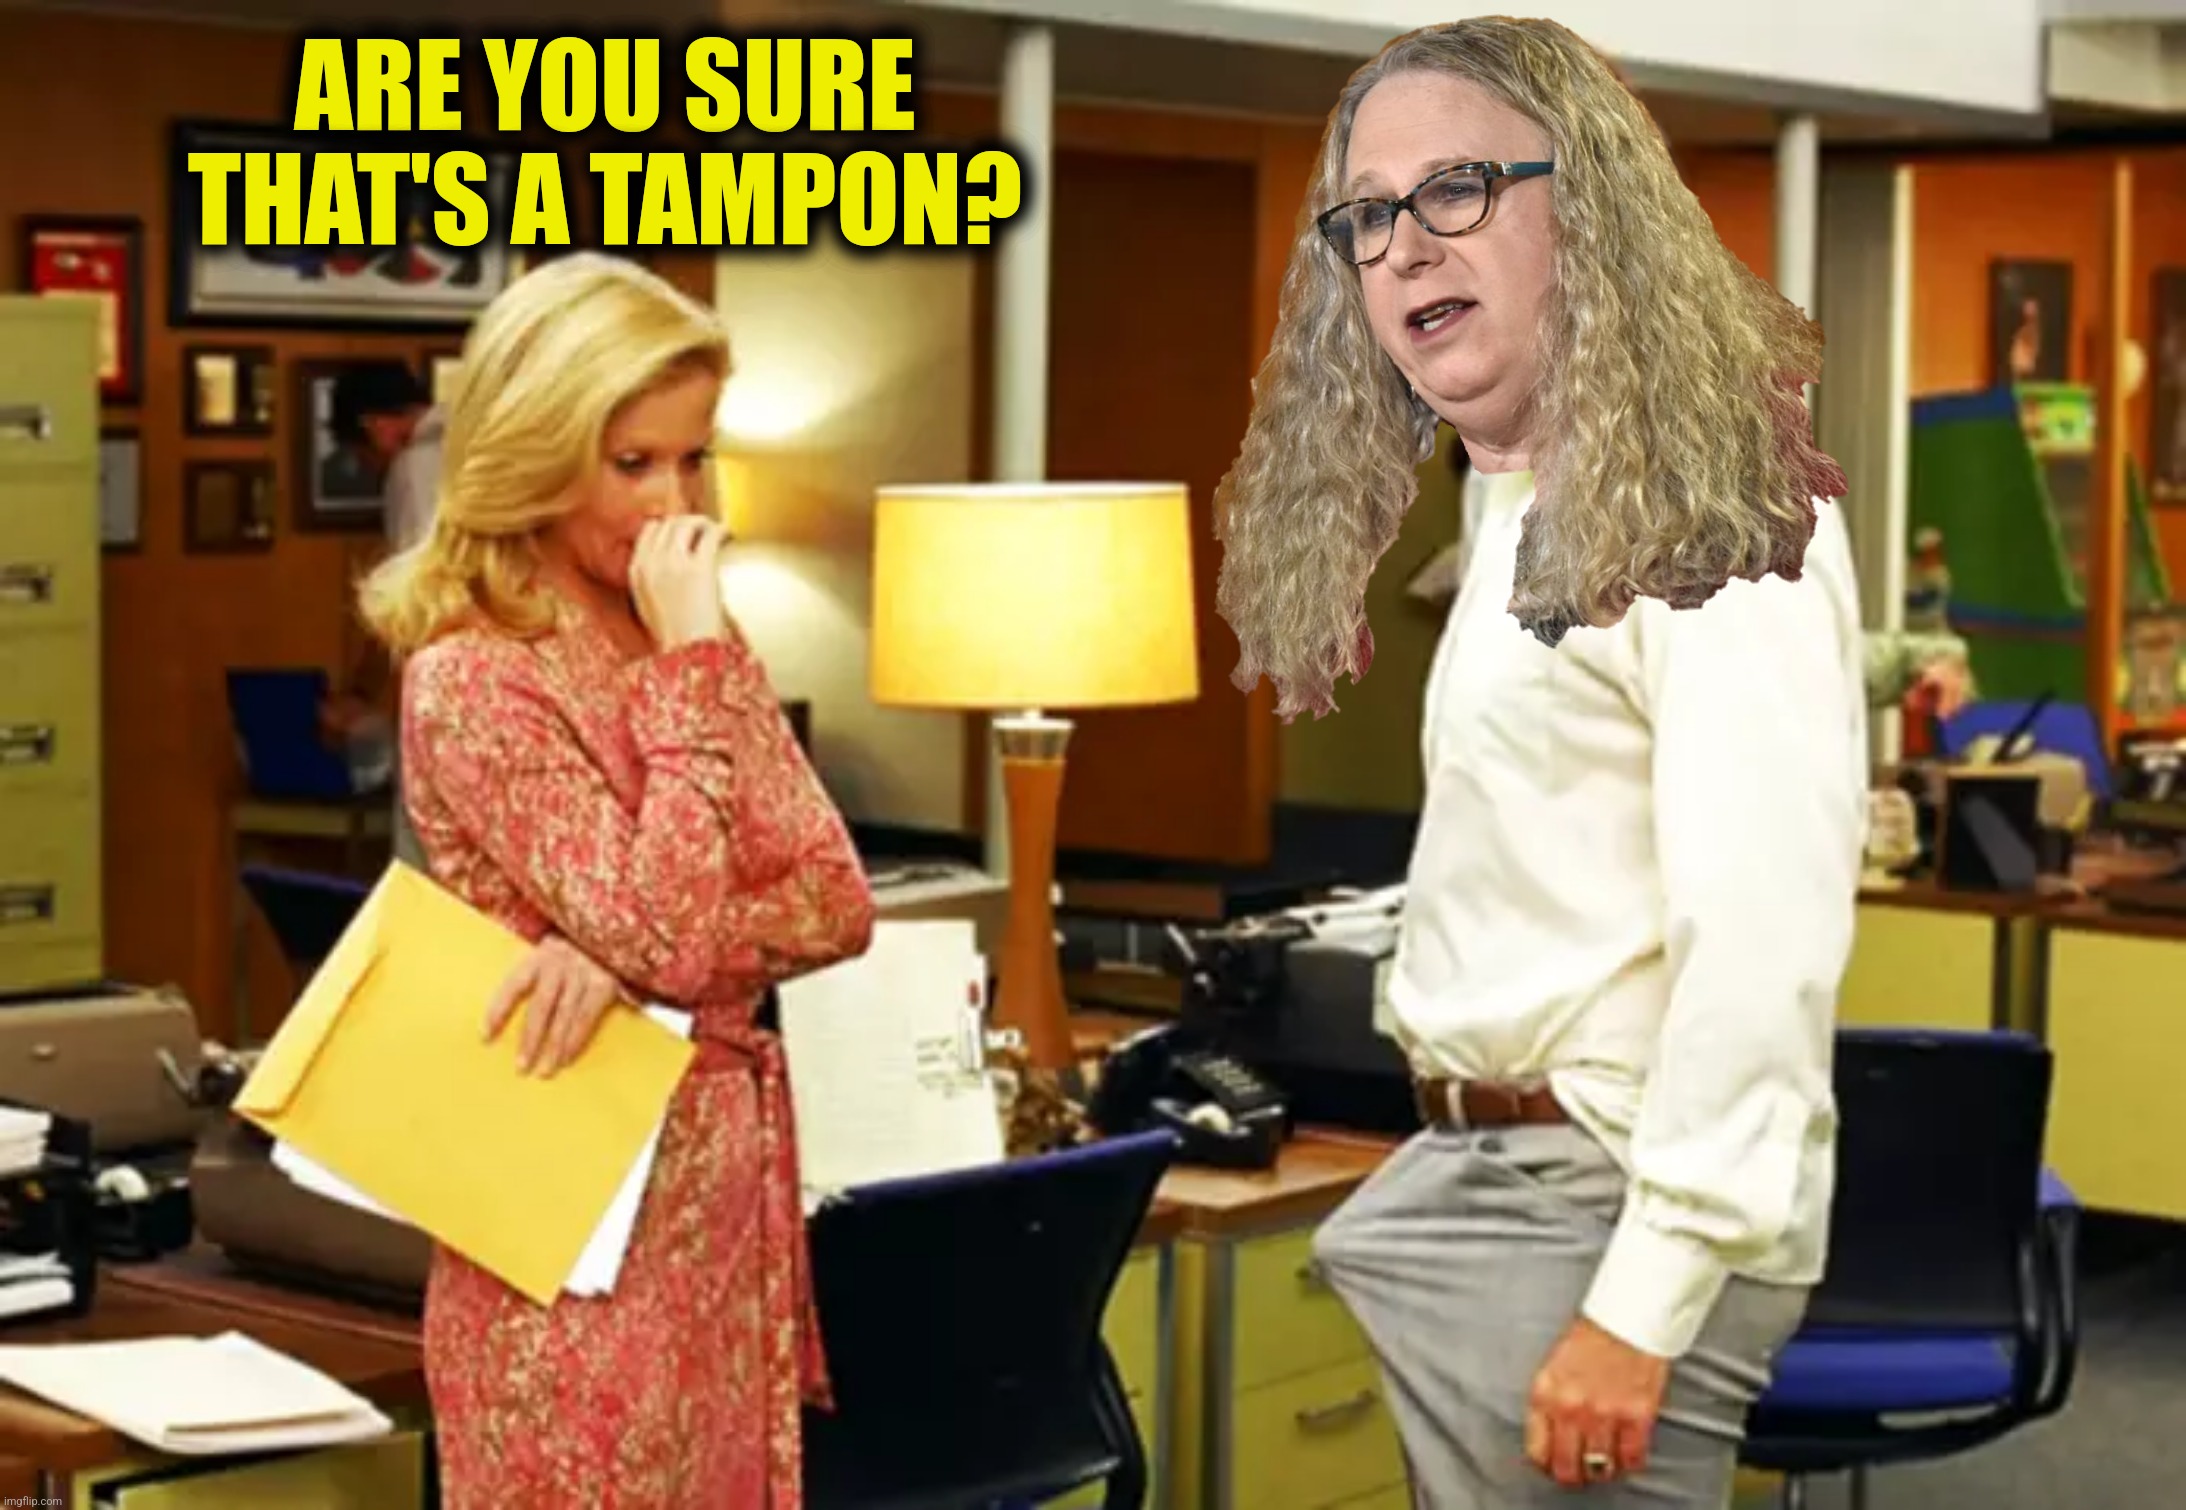 ARE YOU SURE THAT'S A TAMPON? | made w/ Imgflip meme maker